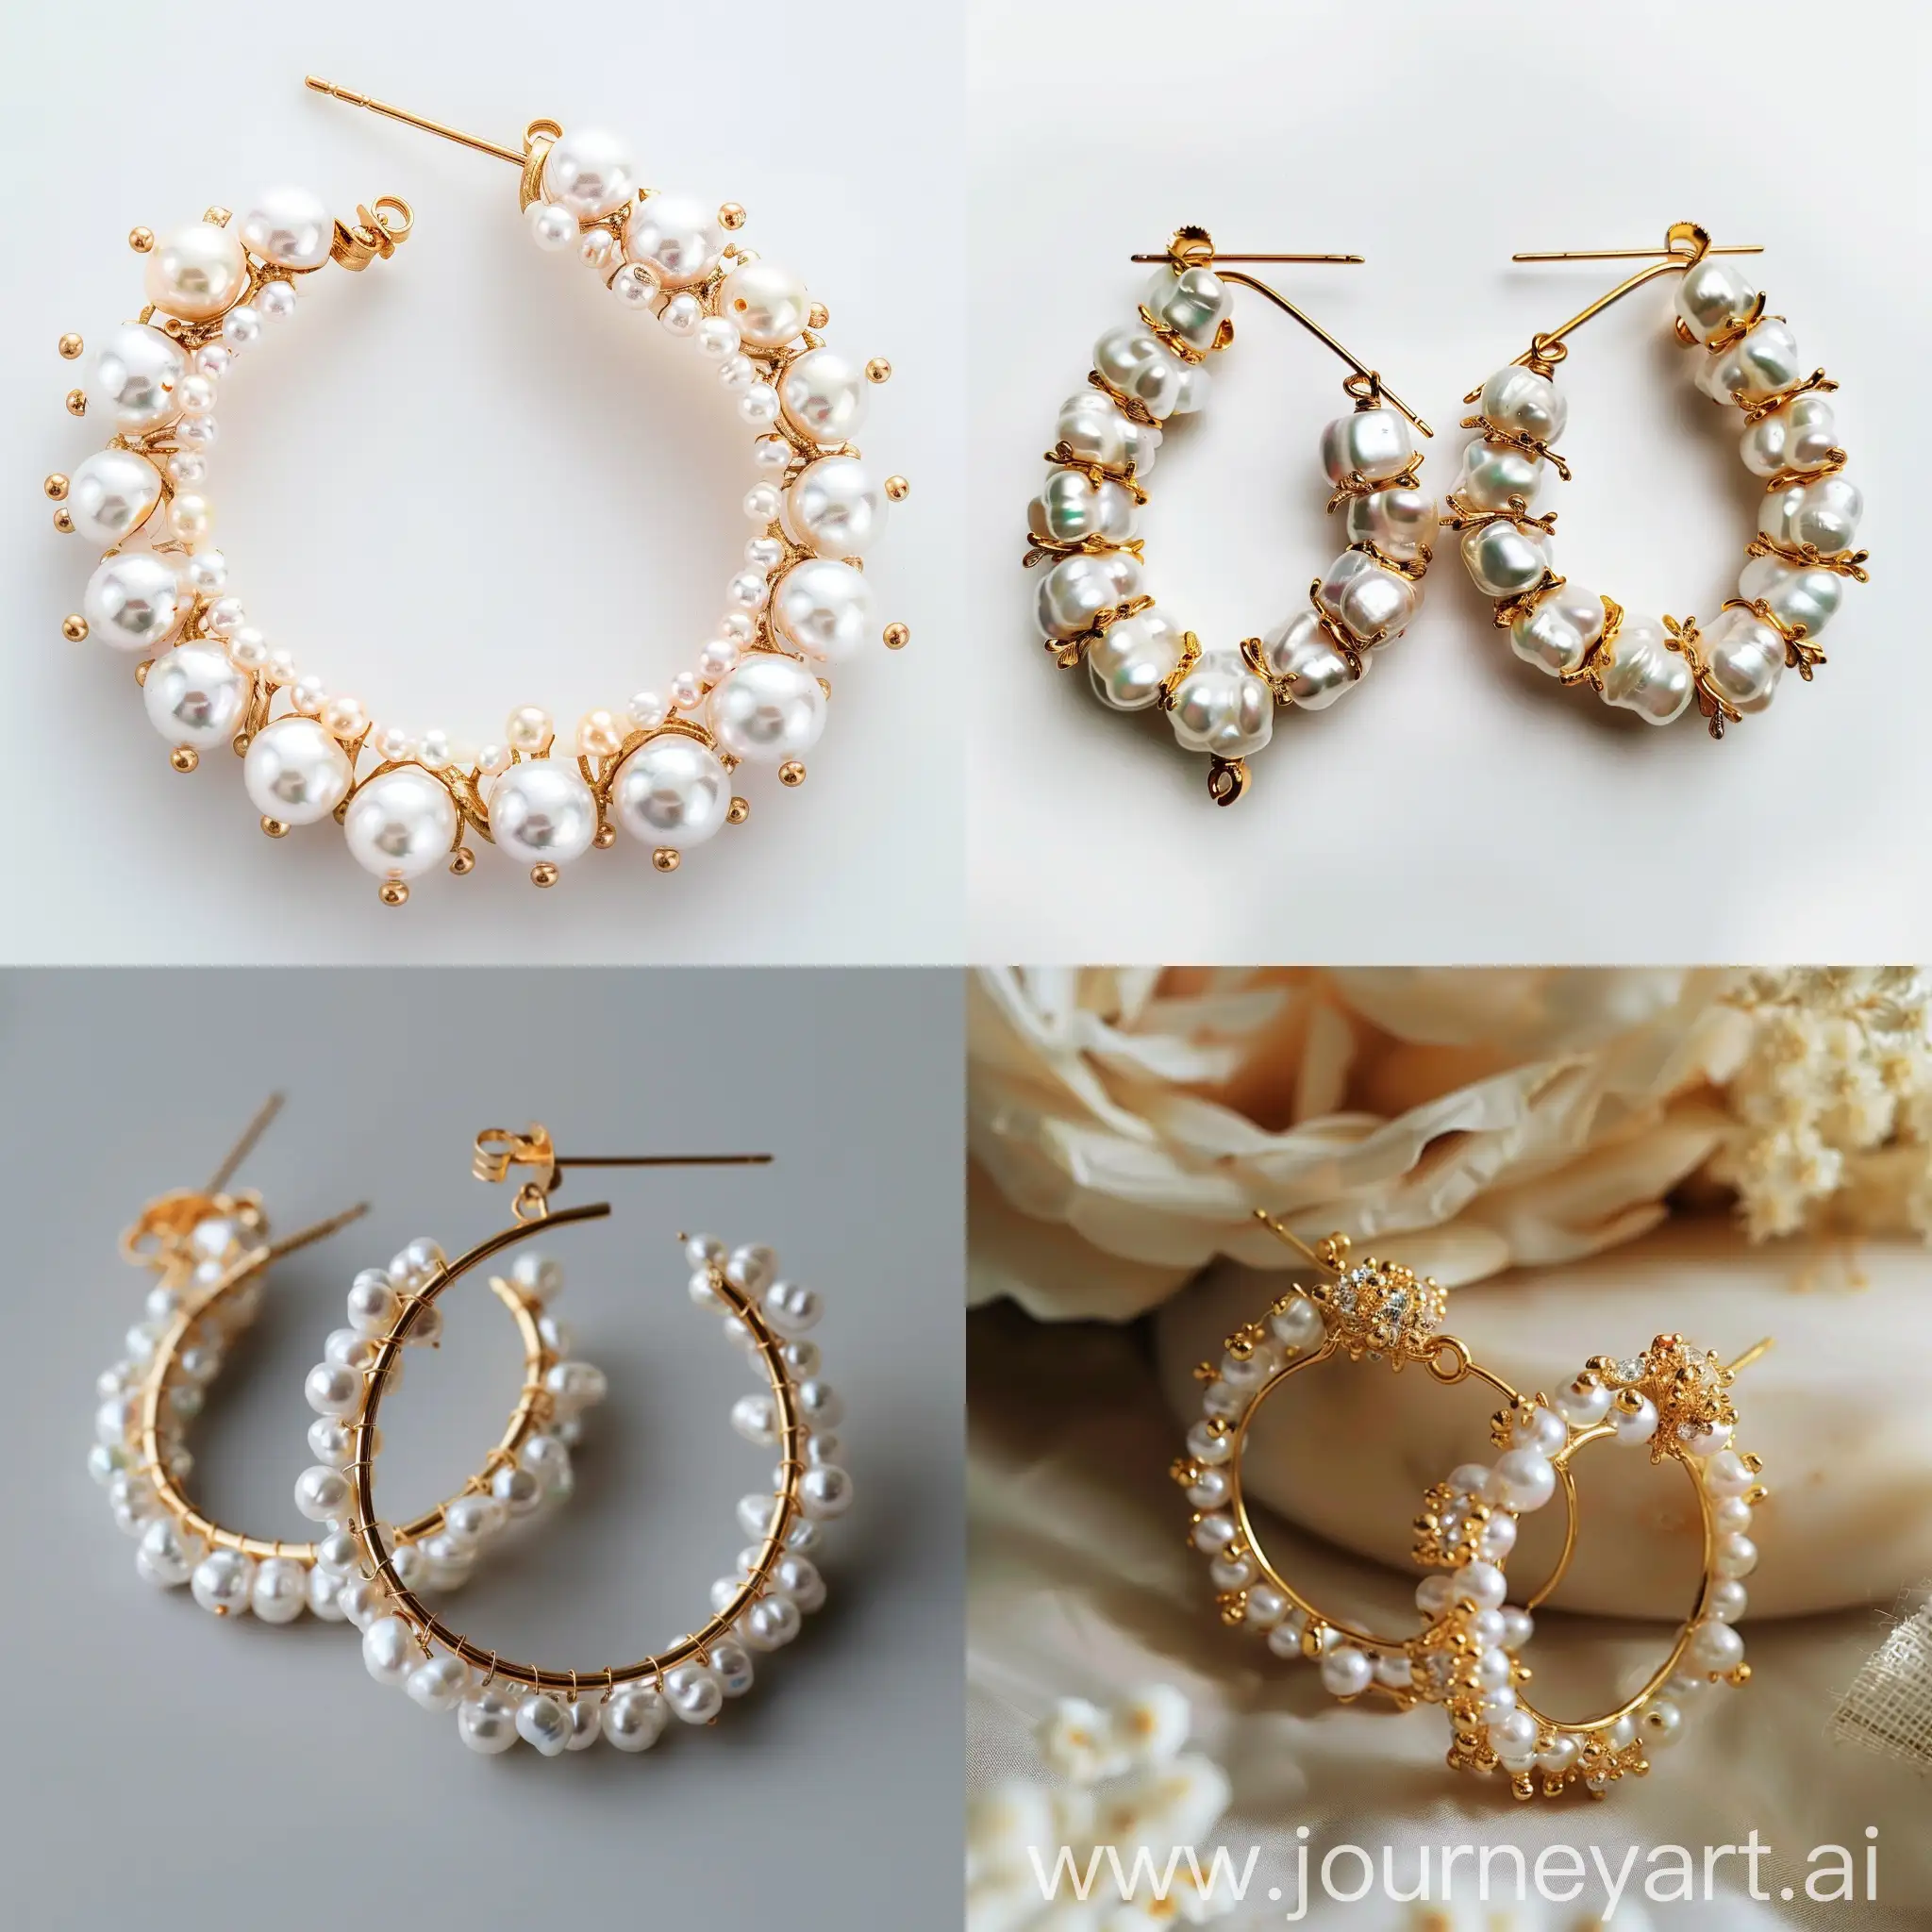 Fashionable-Chunky-Gold-Hoop-Earrings-with-White-Pearls